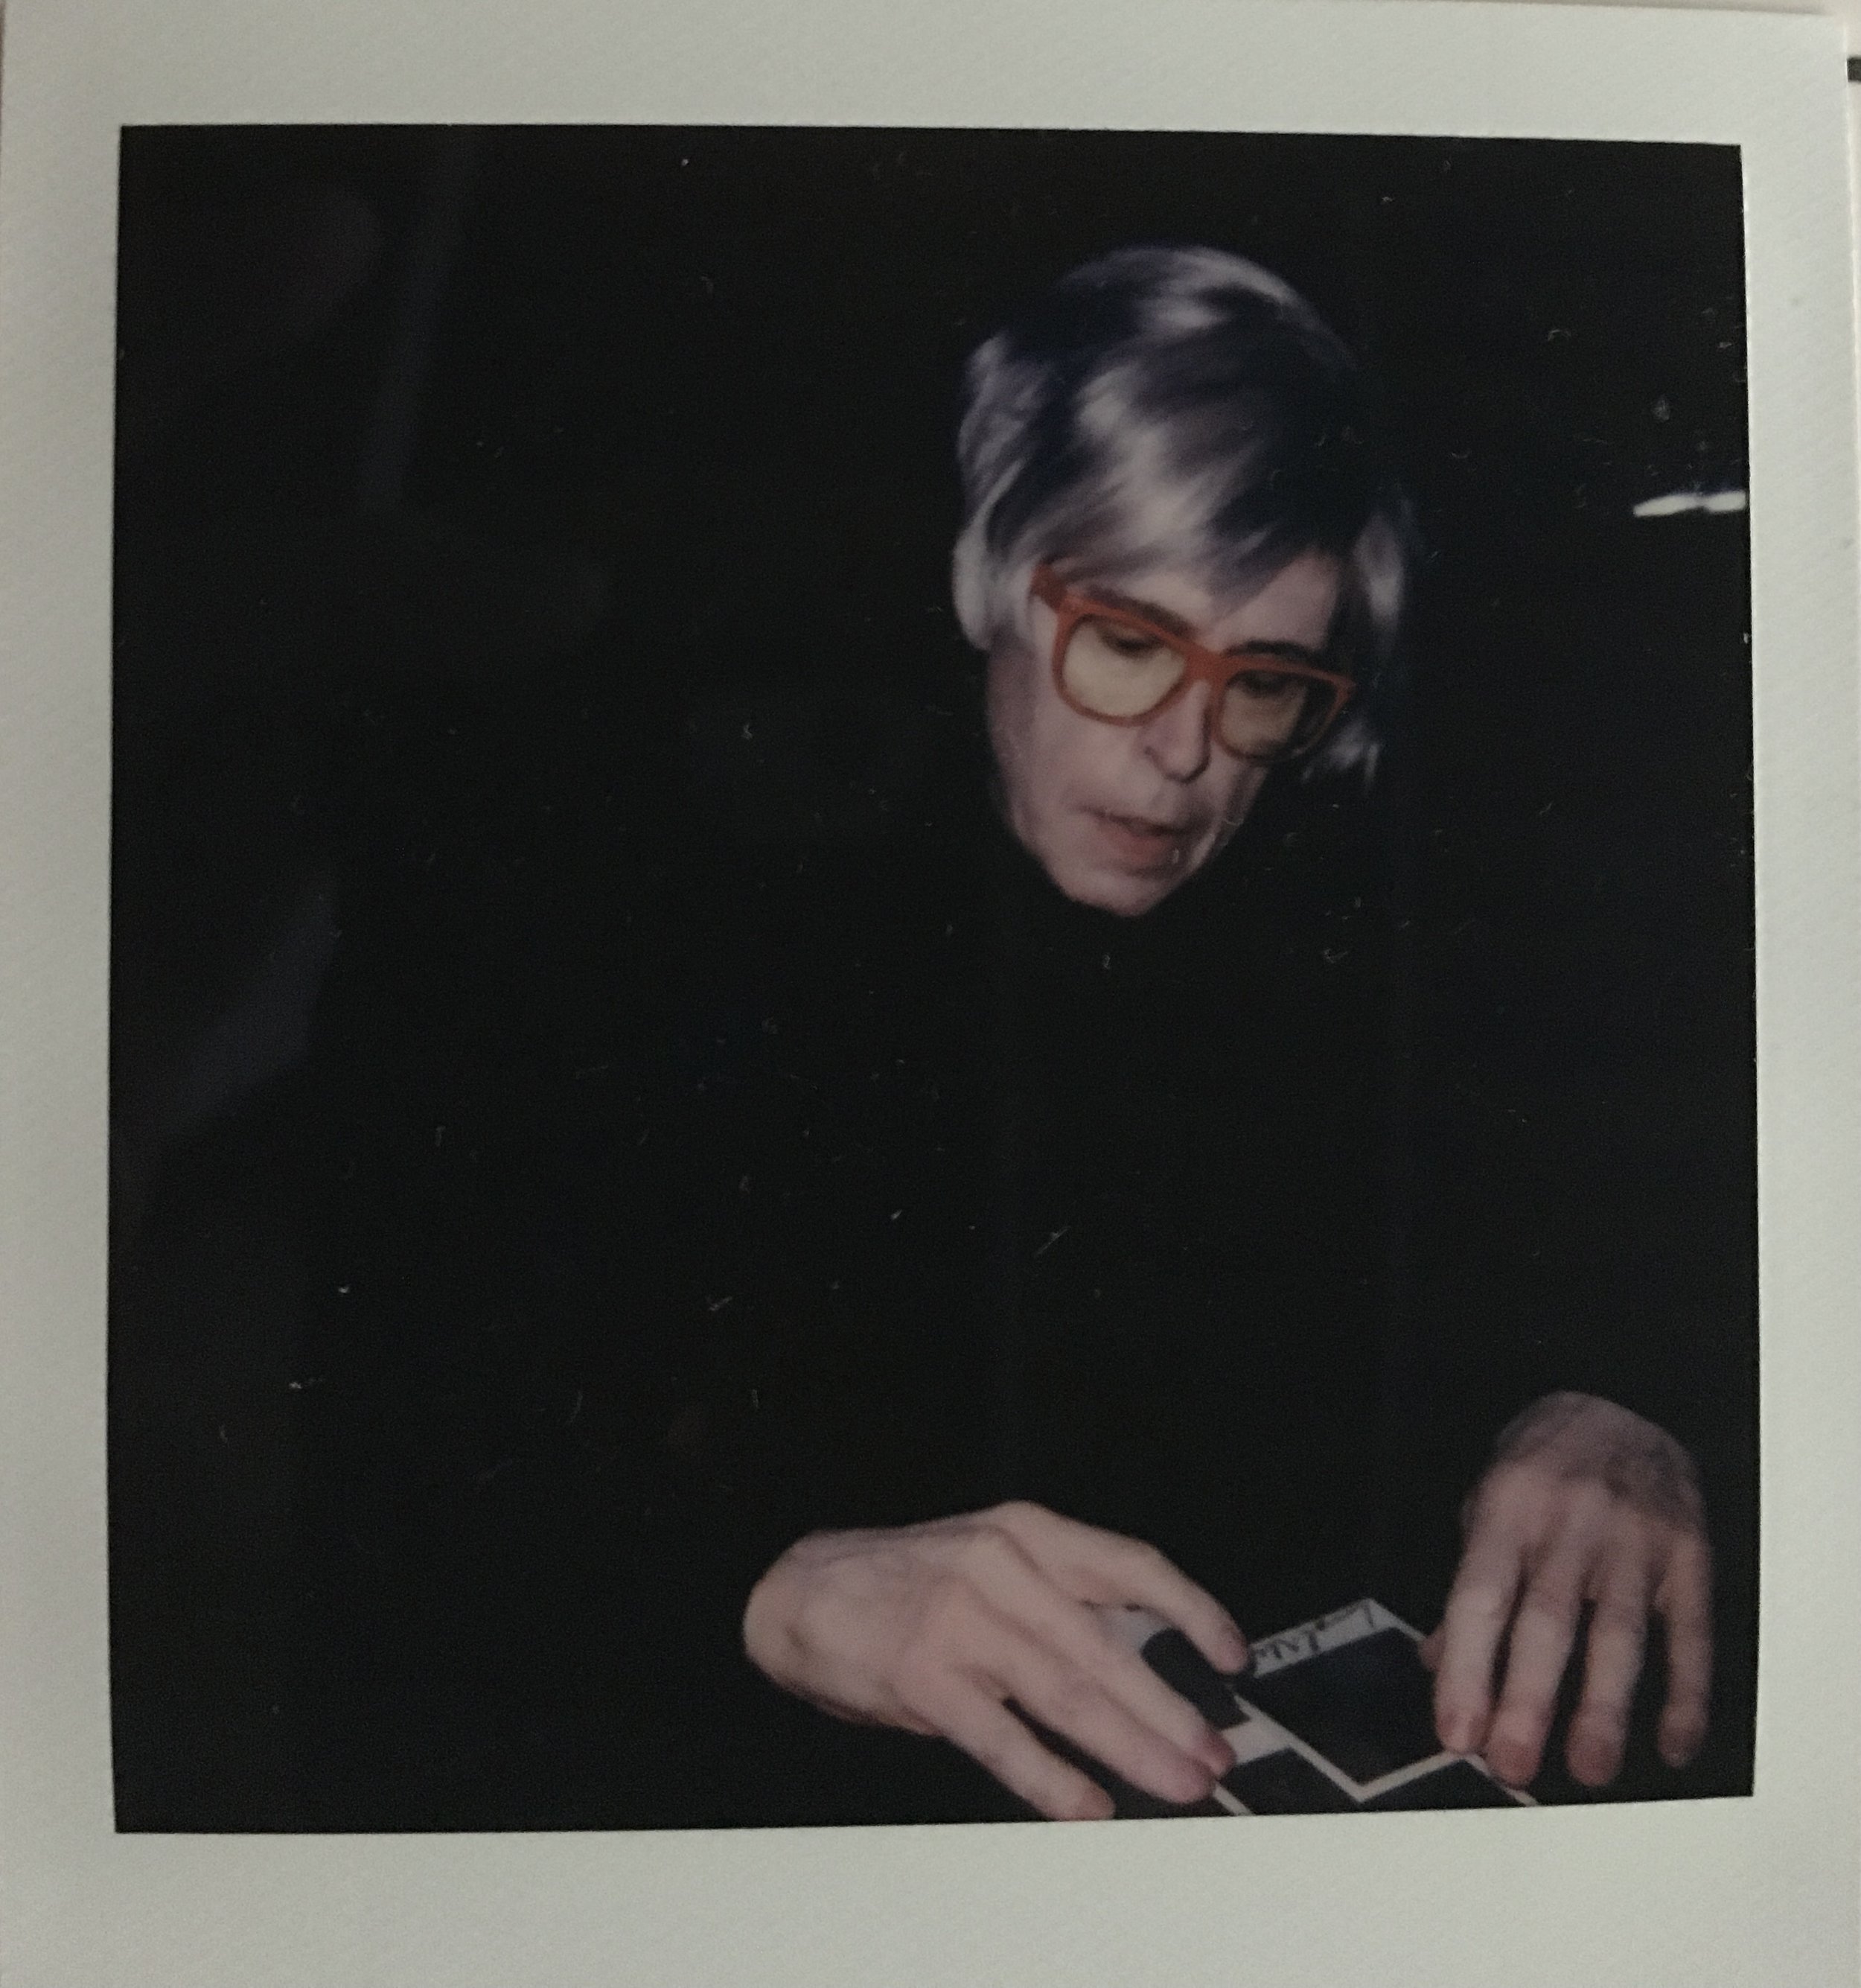  Brian Kelly as Andy Warhol in the Netflix series  The Andy Warhol Diaries . 